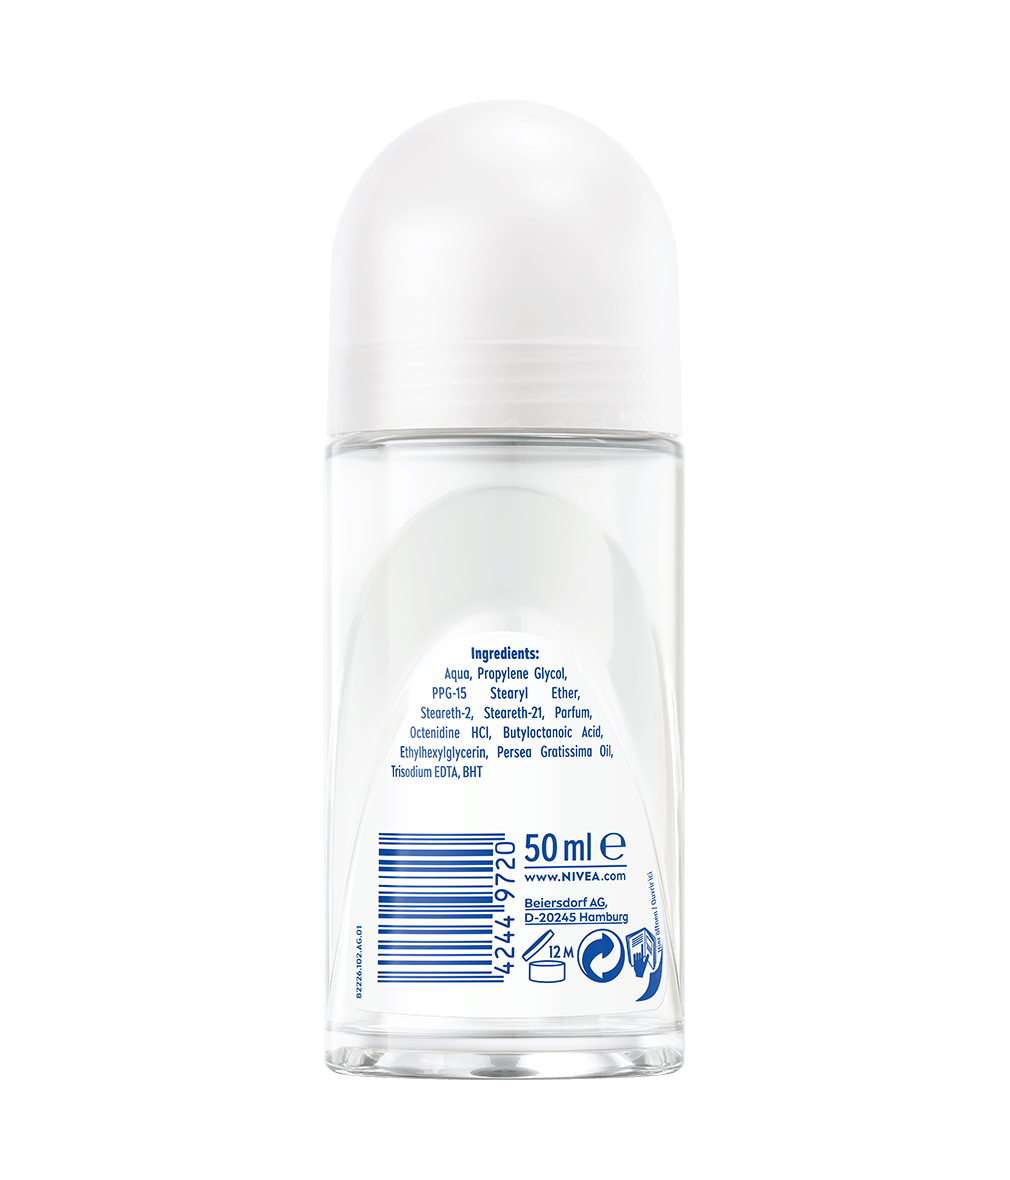 Summer Happiness Deodorant Roll In 50 ml